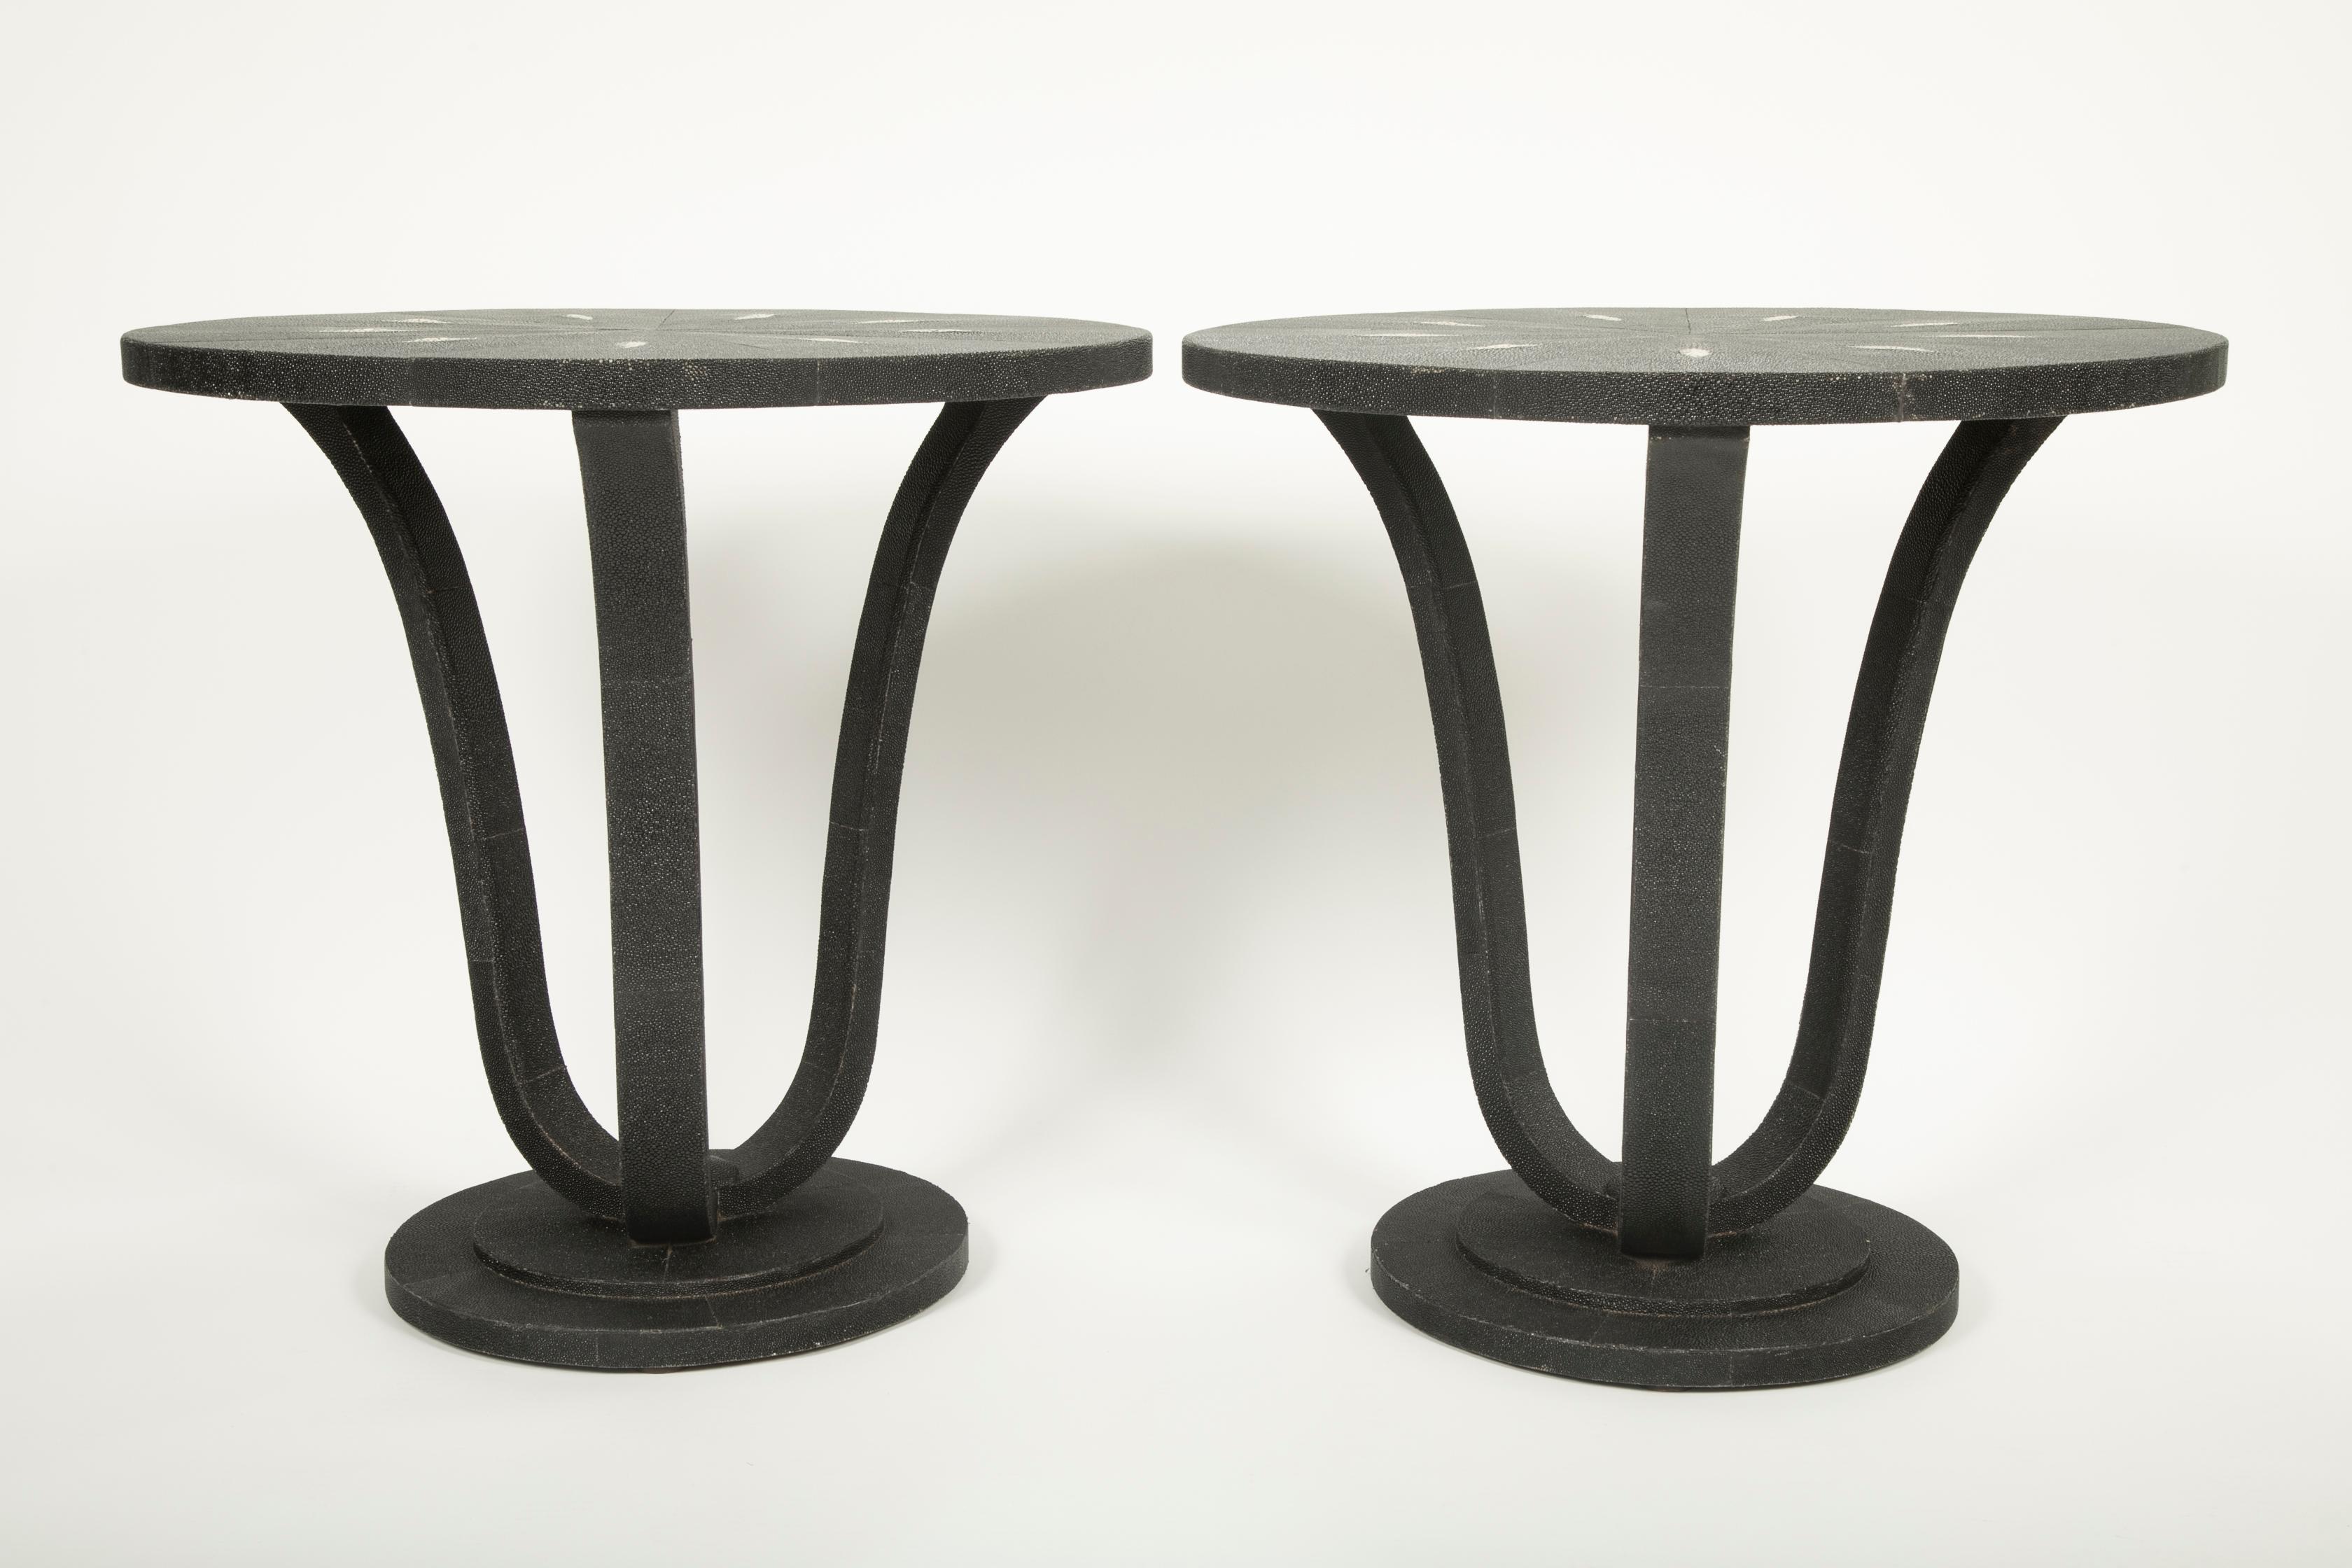 A striking pair of English of Shagreen covered end tables. Produced by Lamberty Bespoke furniture, circa 1990s. Sold individually.